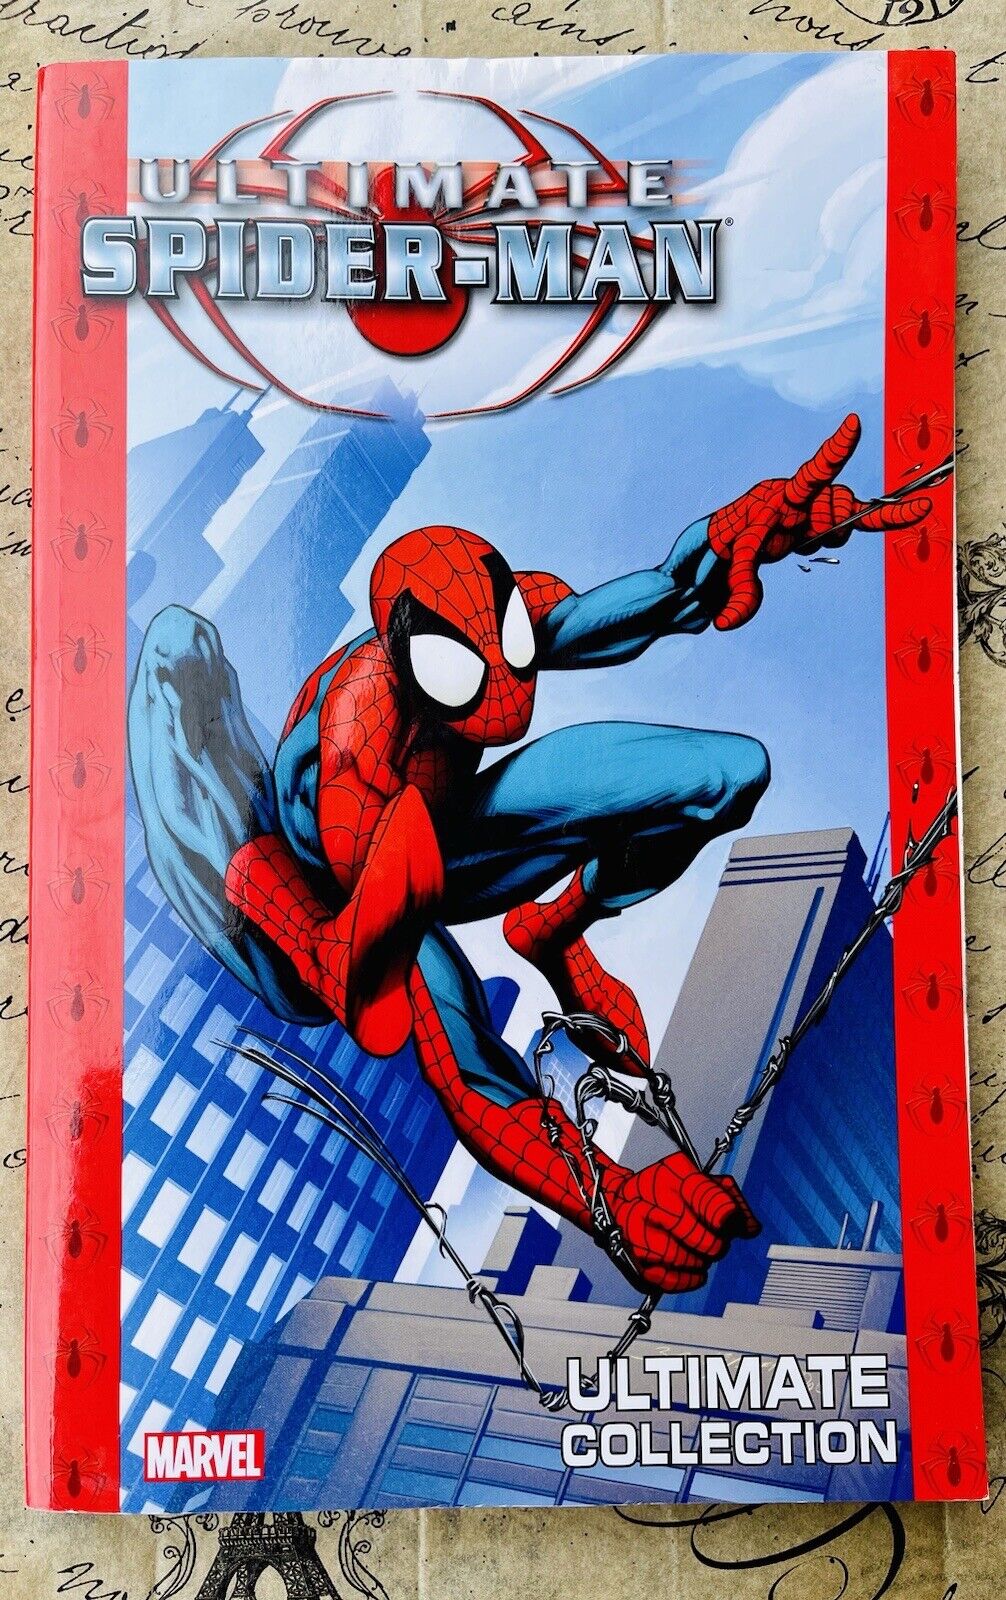 Ultimate Spider-Man: Ultimate Collection #1 (Marvel Comics 2007)